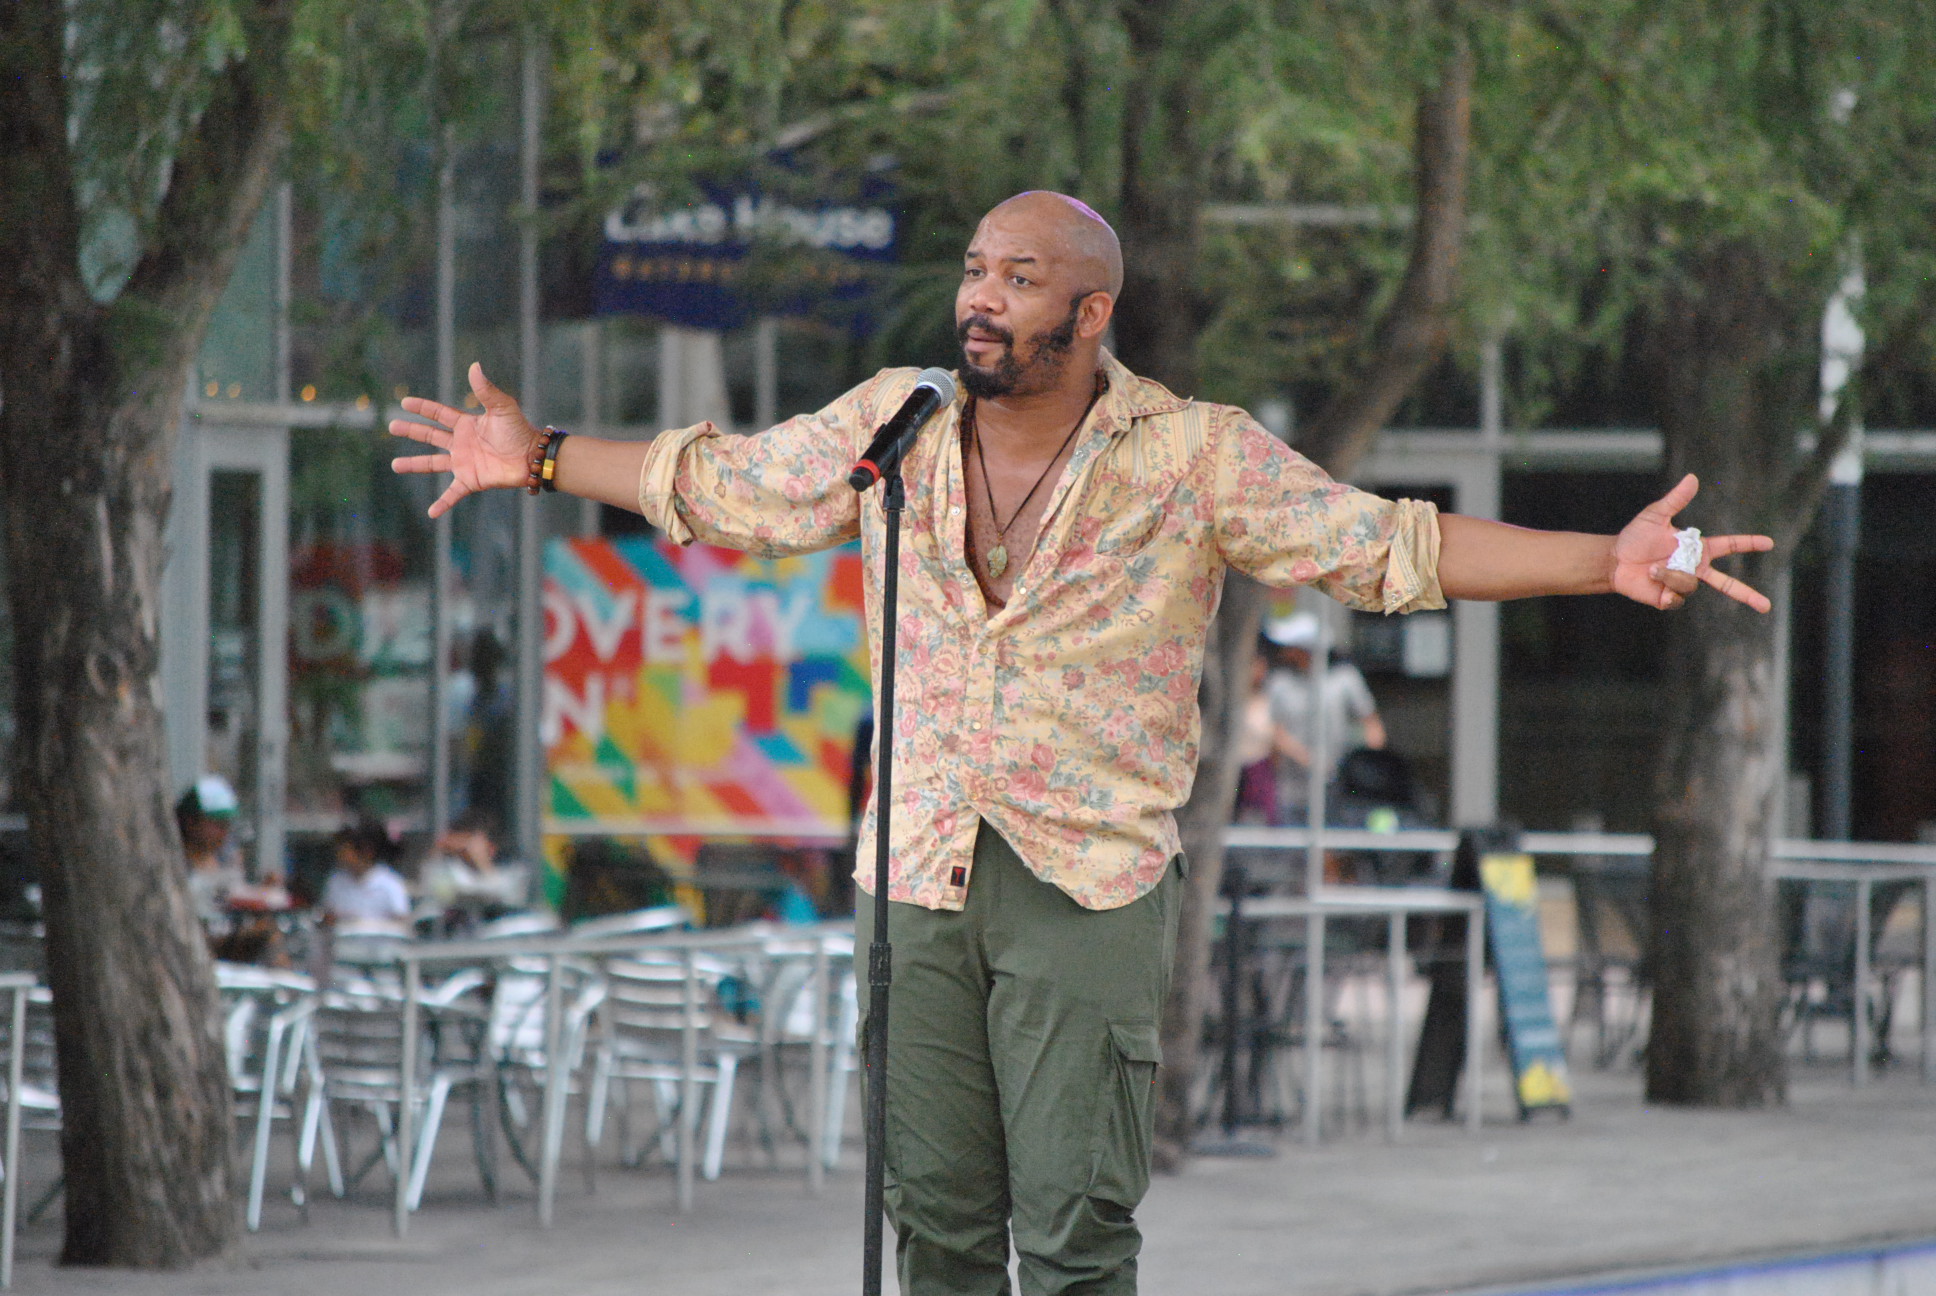 Black spoken word poet stands in front of a microphone on an outdoor stage.